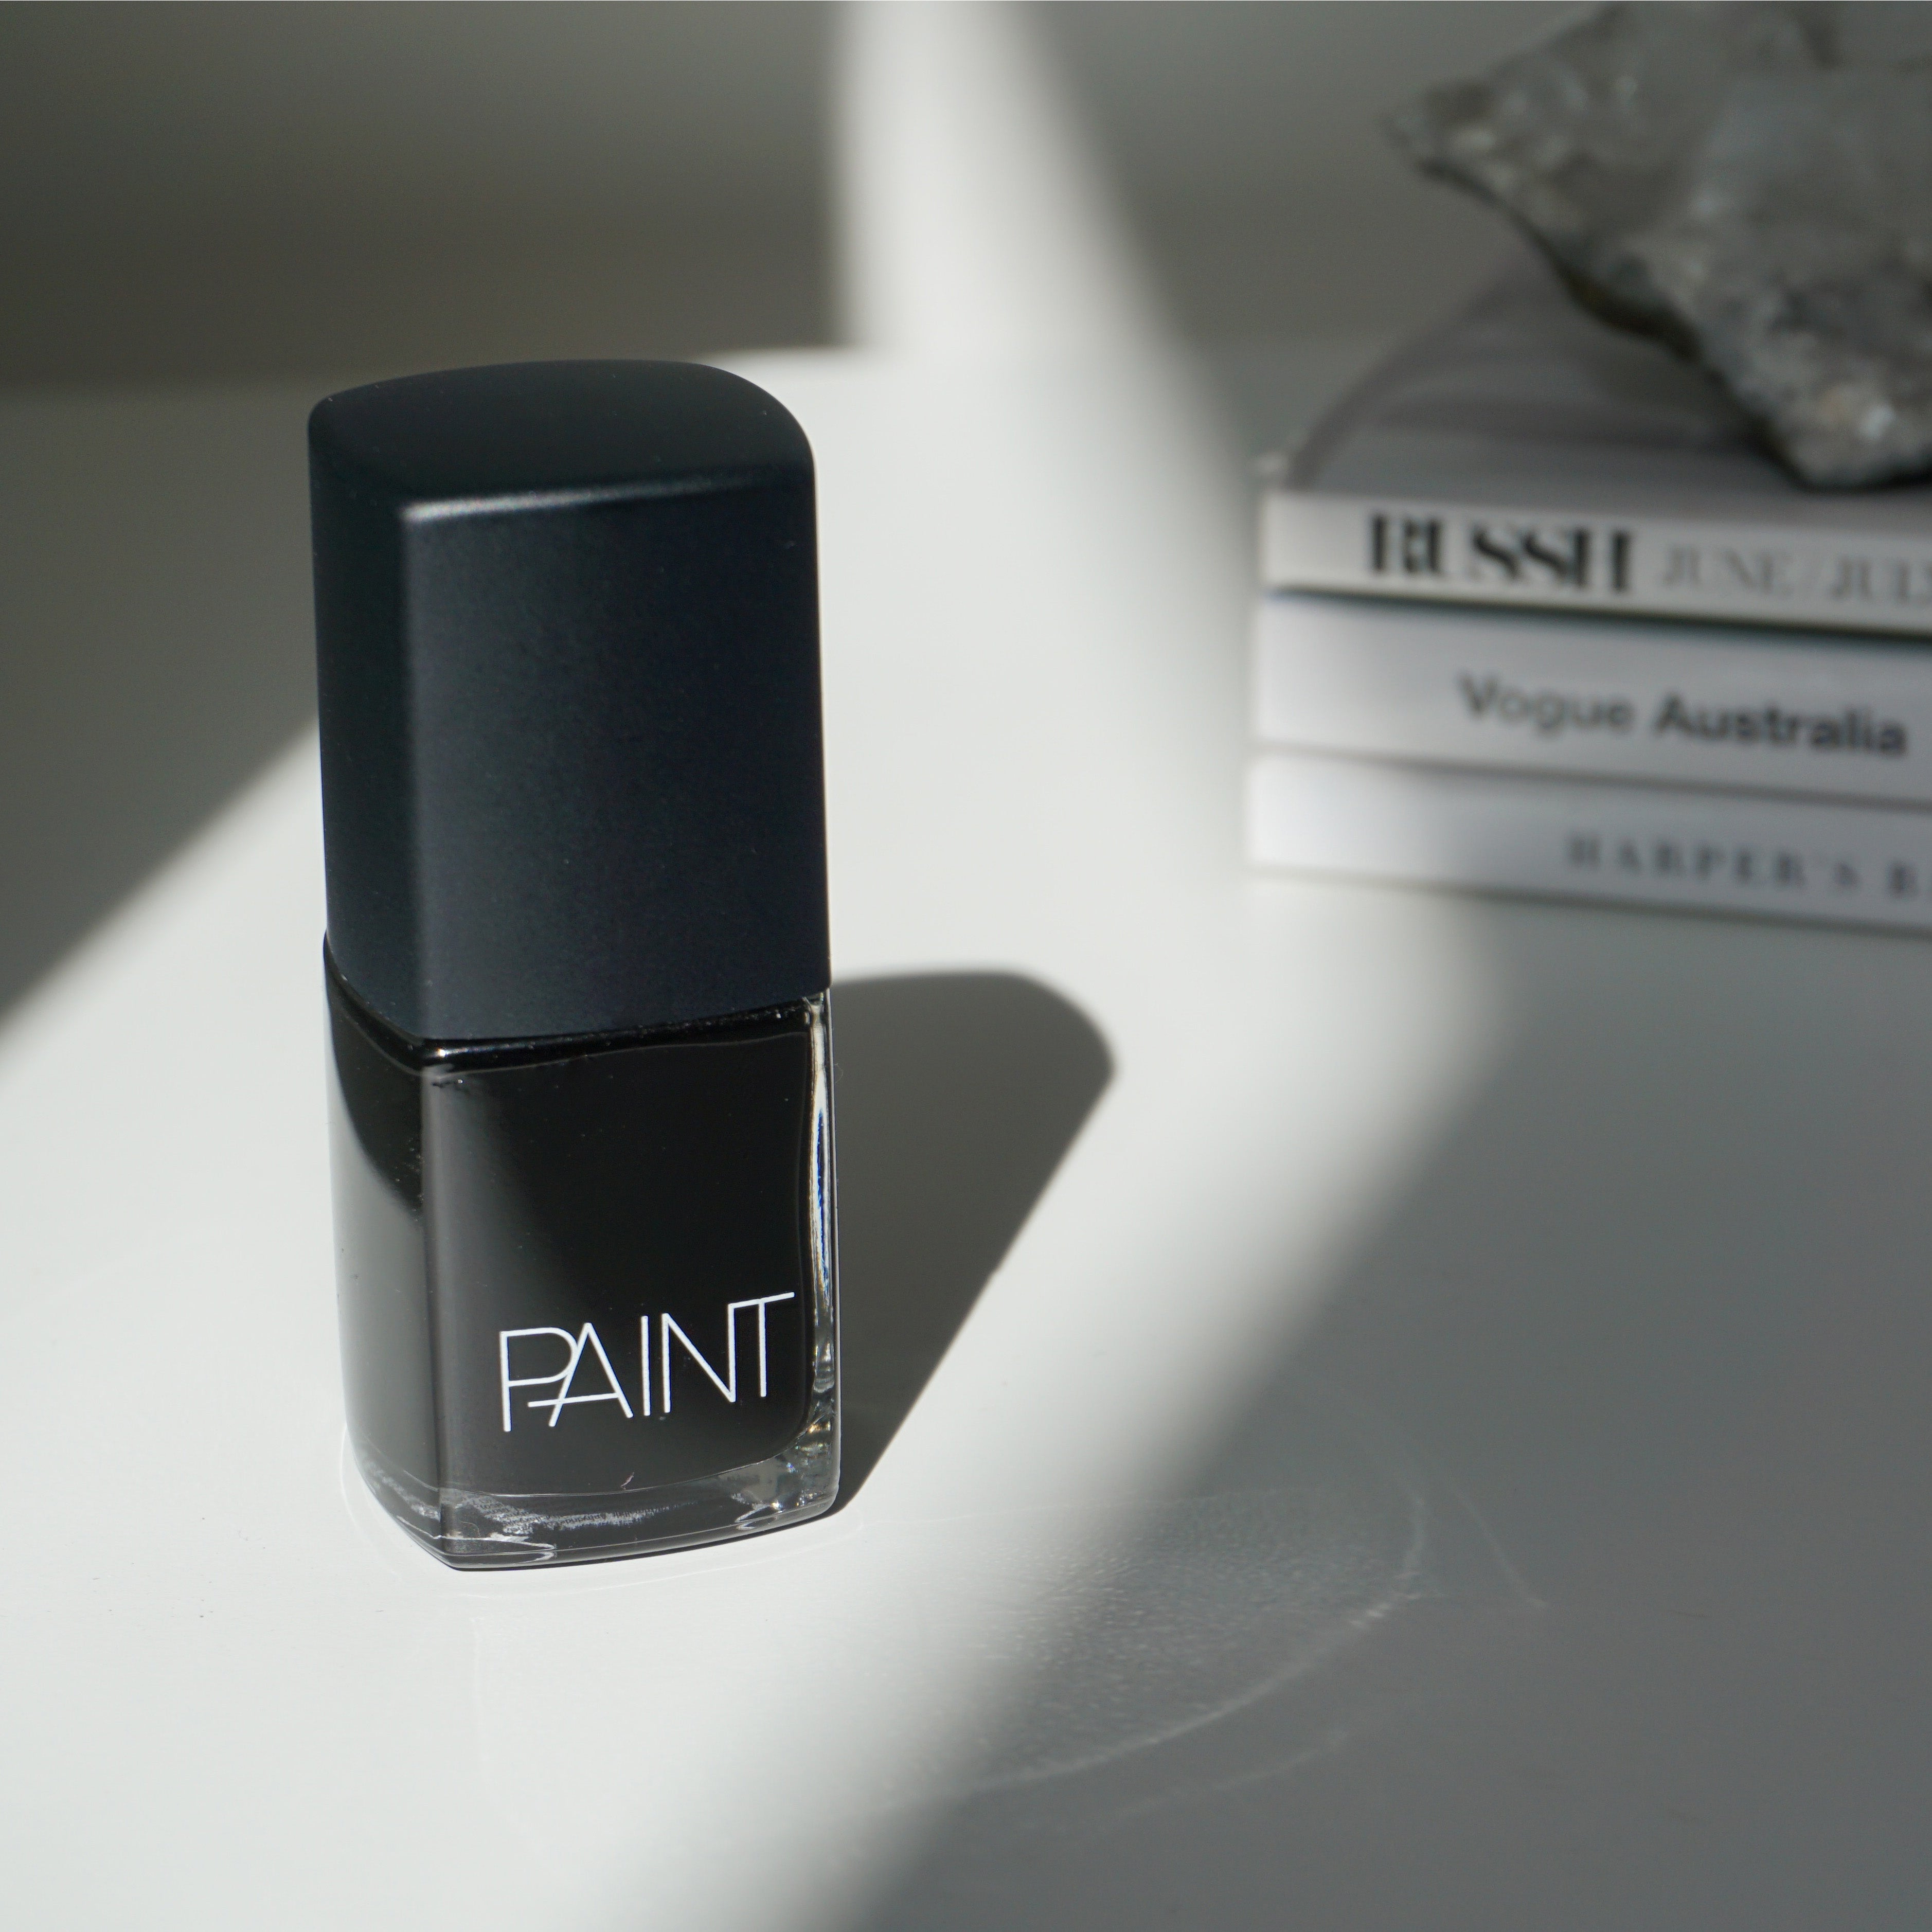 A bottle of Black Dog nail polish by Paint Nail Lacquer against a white backdrop with the sunsetting on the polish, this shade is a classic black colour  